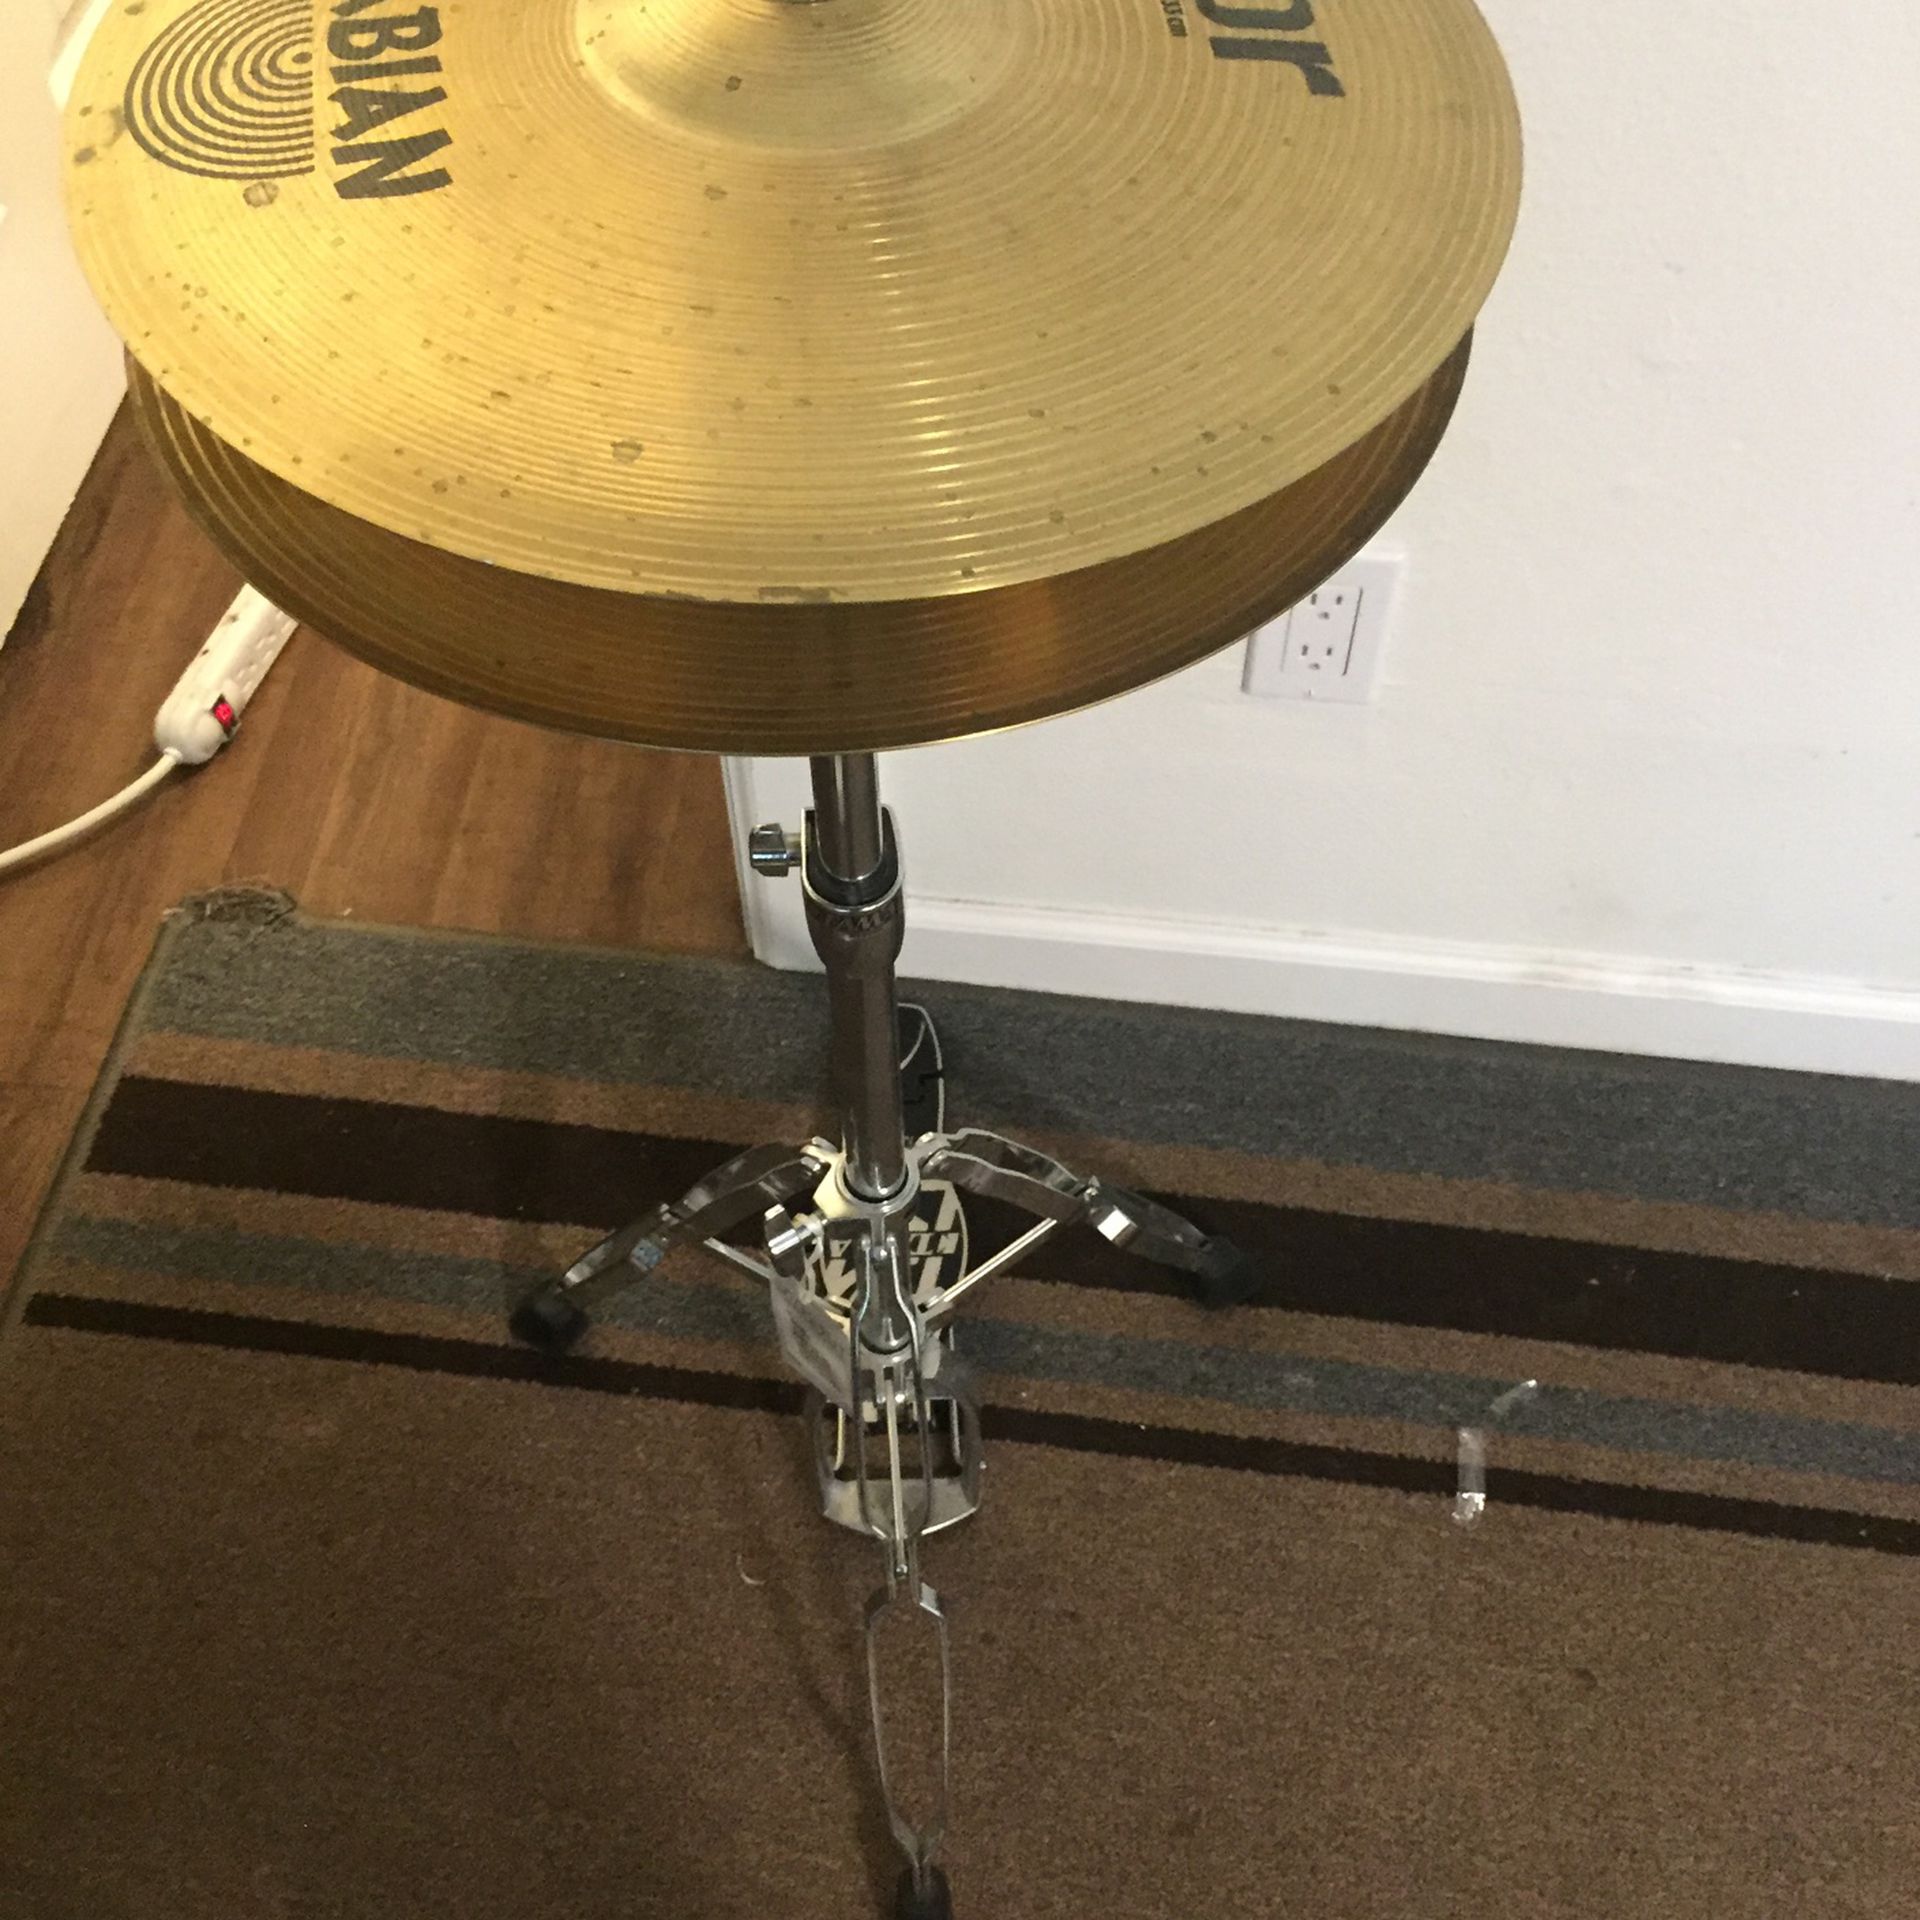 Drum Set/kit-good! Moving Must Sell